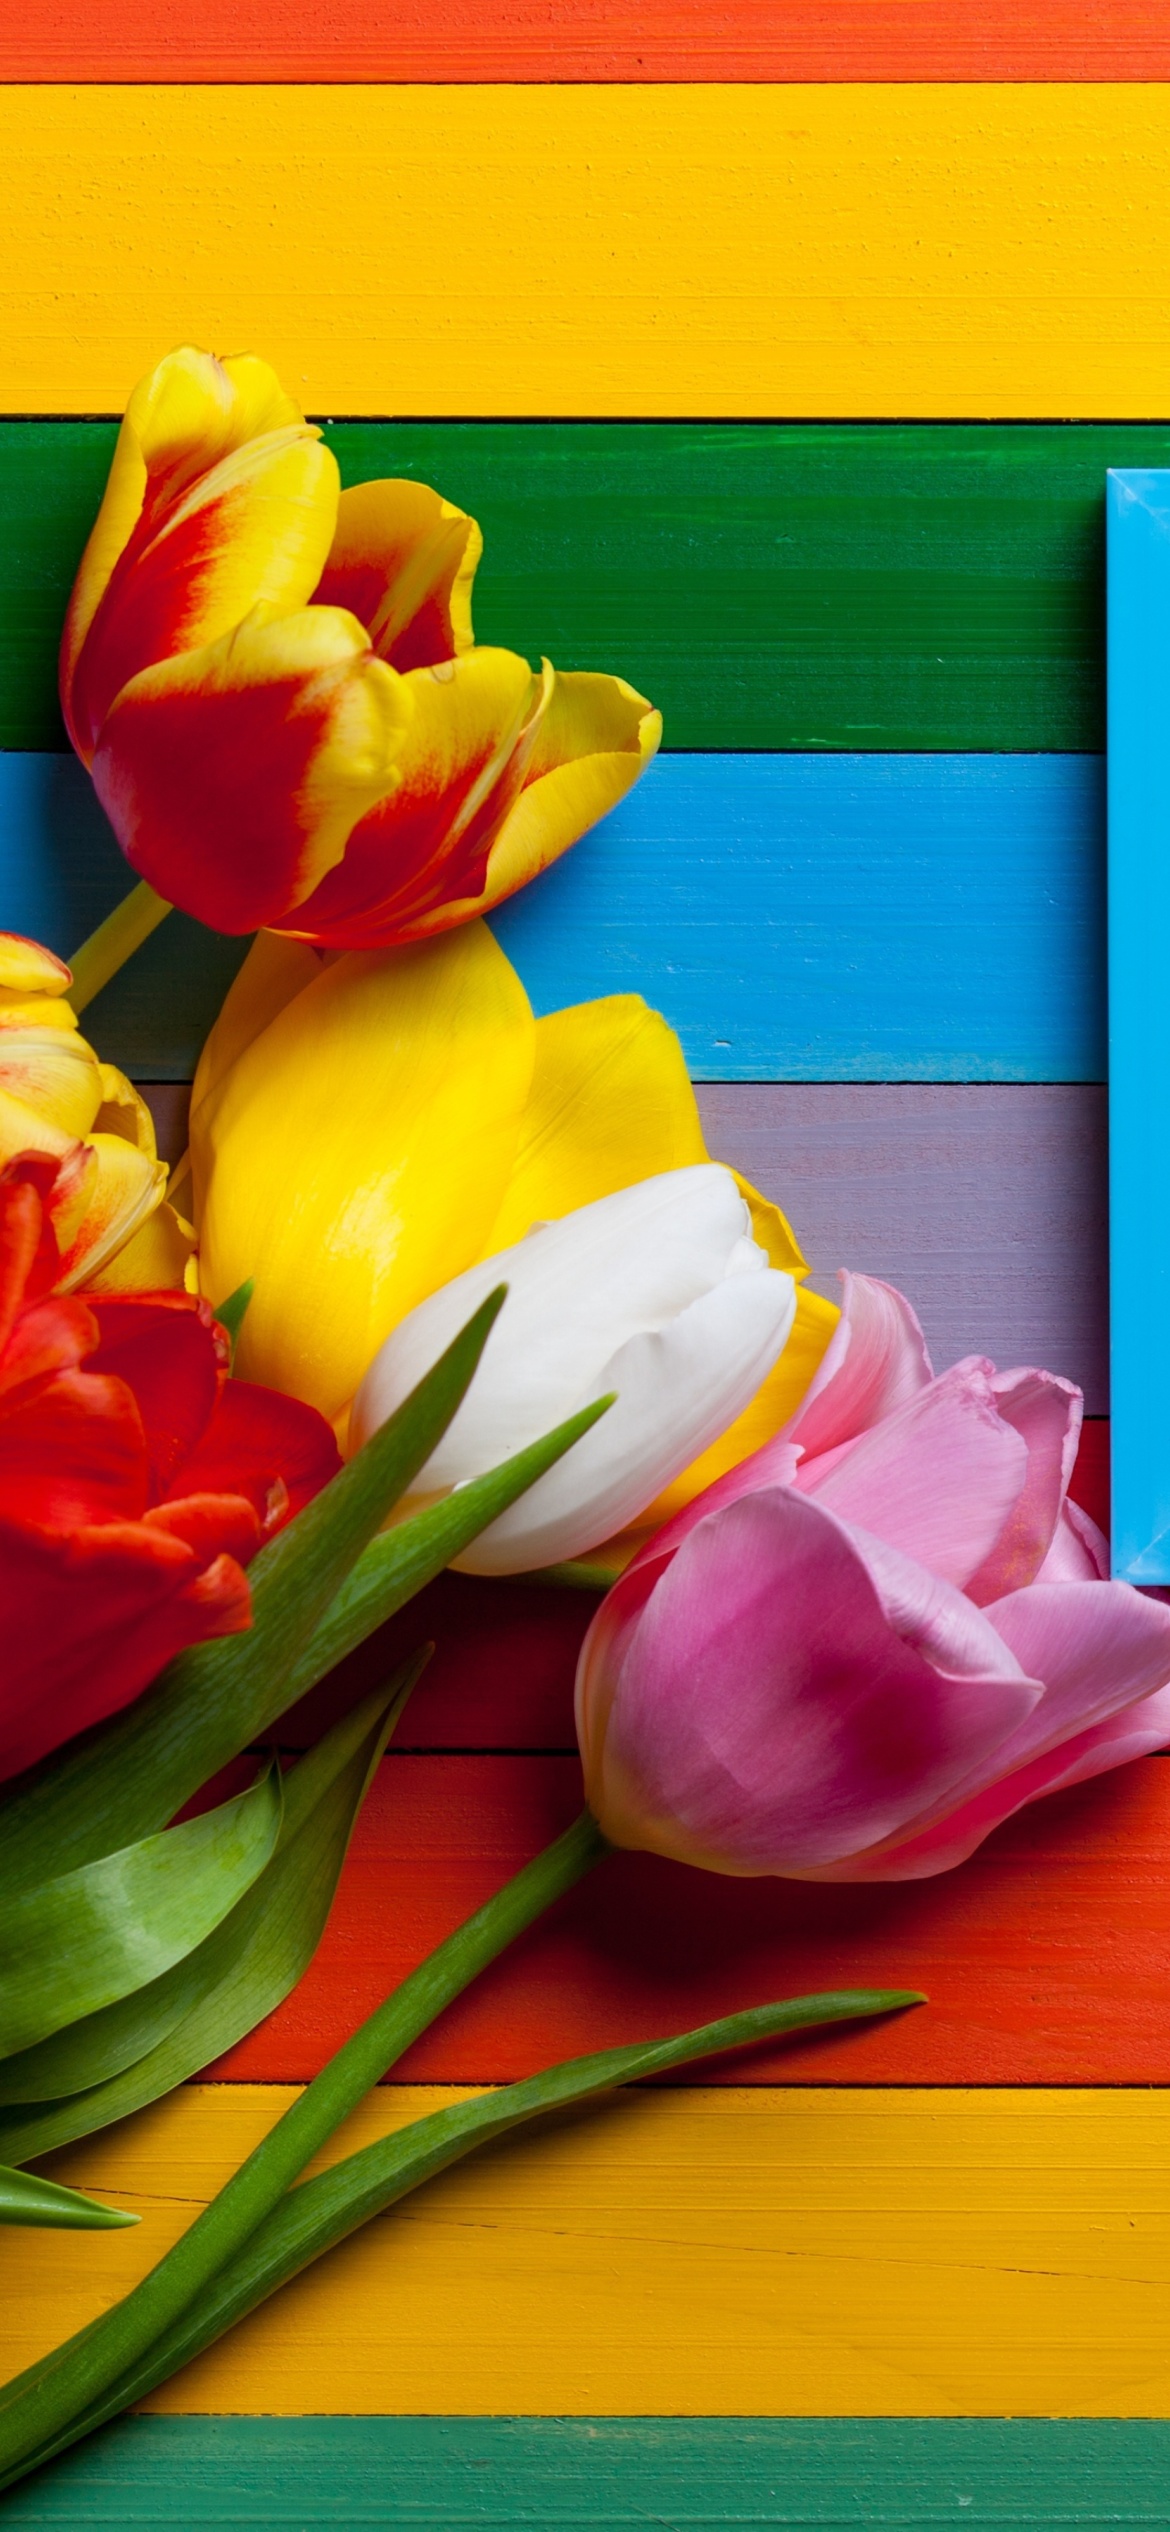 Colorful Tulips wallpaper 1170x2532